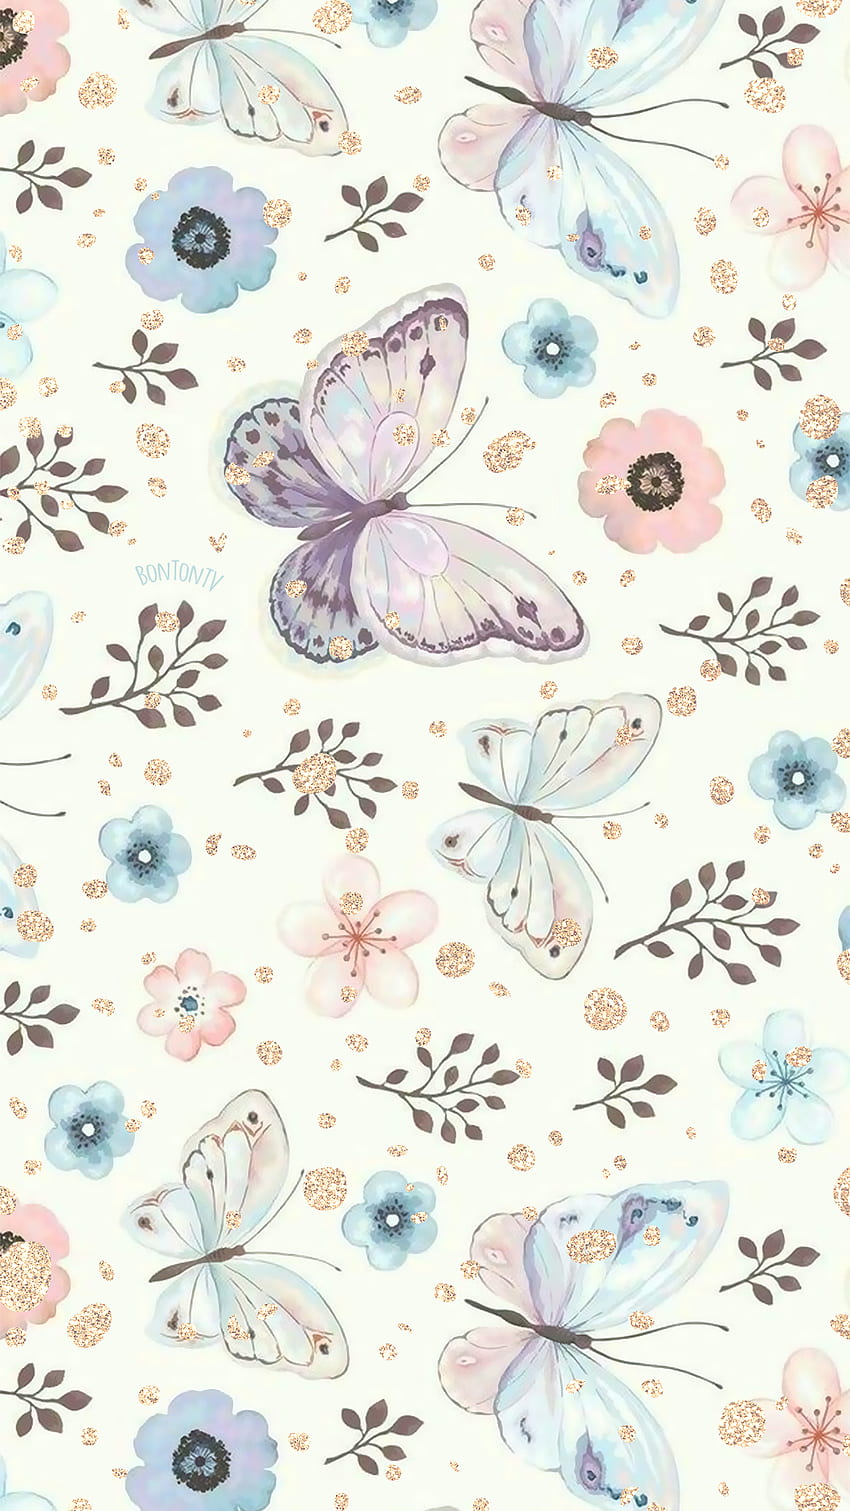 Telefonní tapety - - от Bonton TV - - iPhone, Android през 2020 г. Butterfly iphone, Butterfly watercolor, Artsy iphone, Feminine HD тапет за телефон